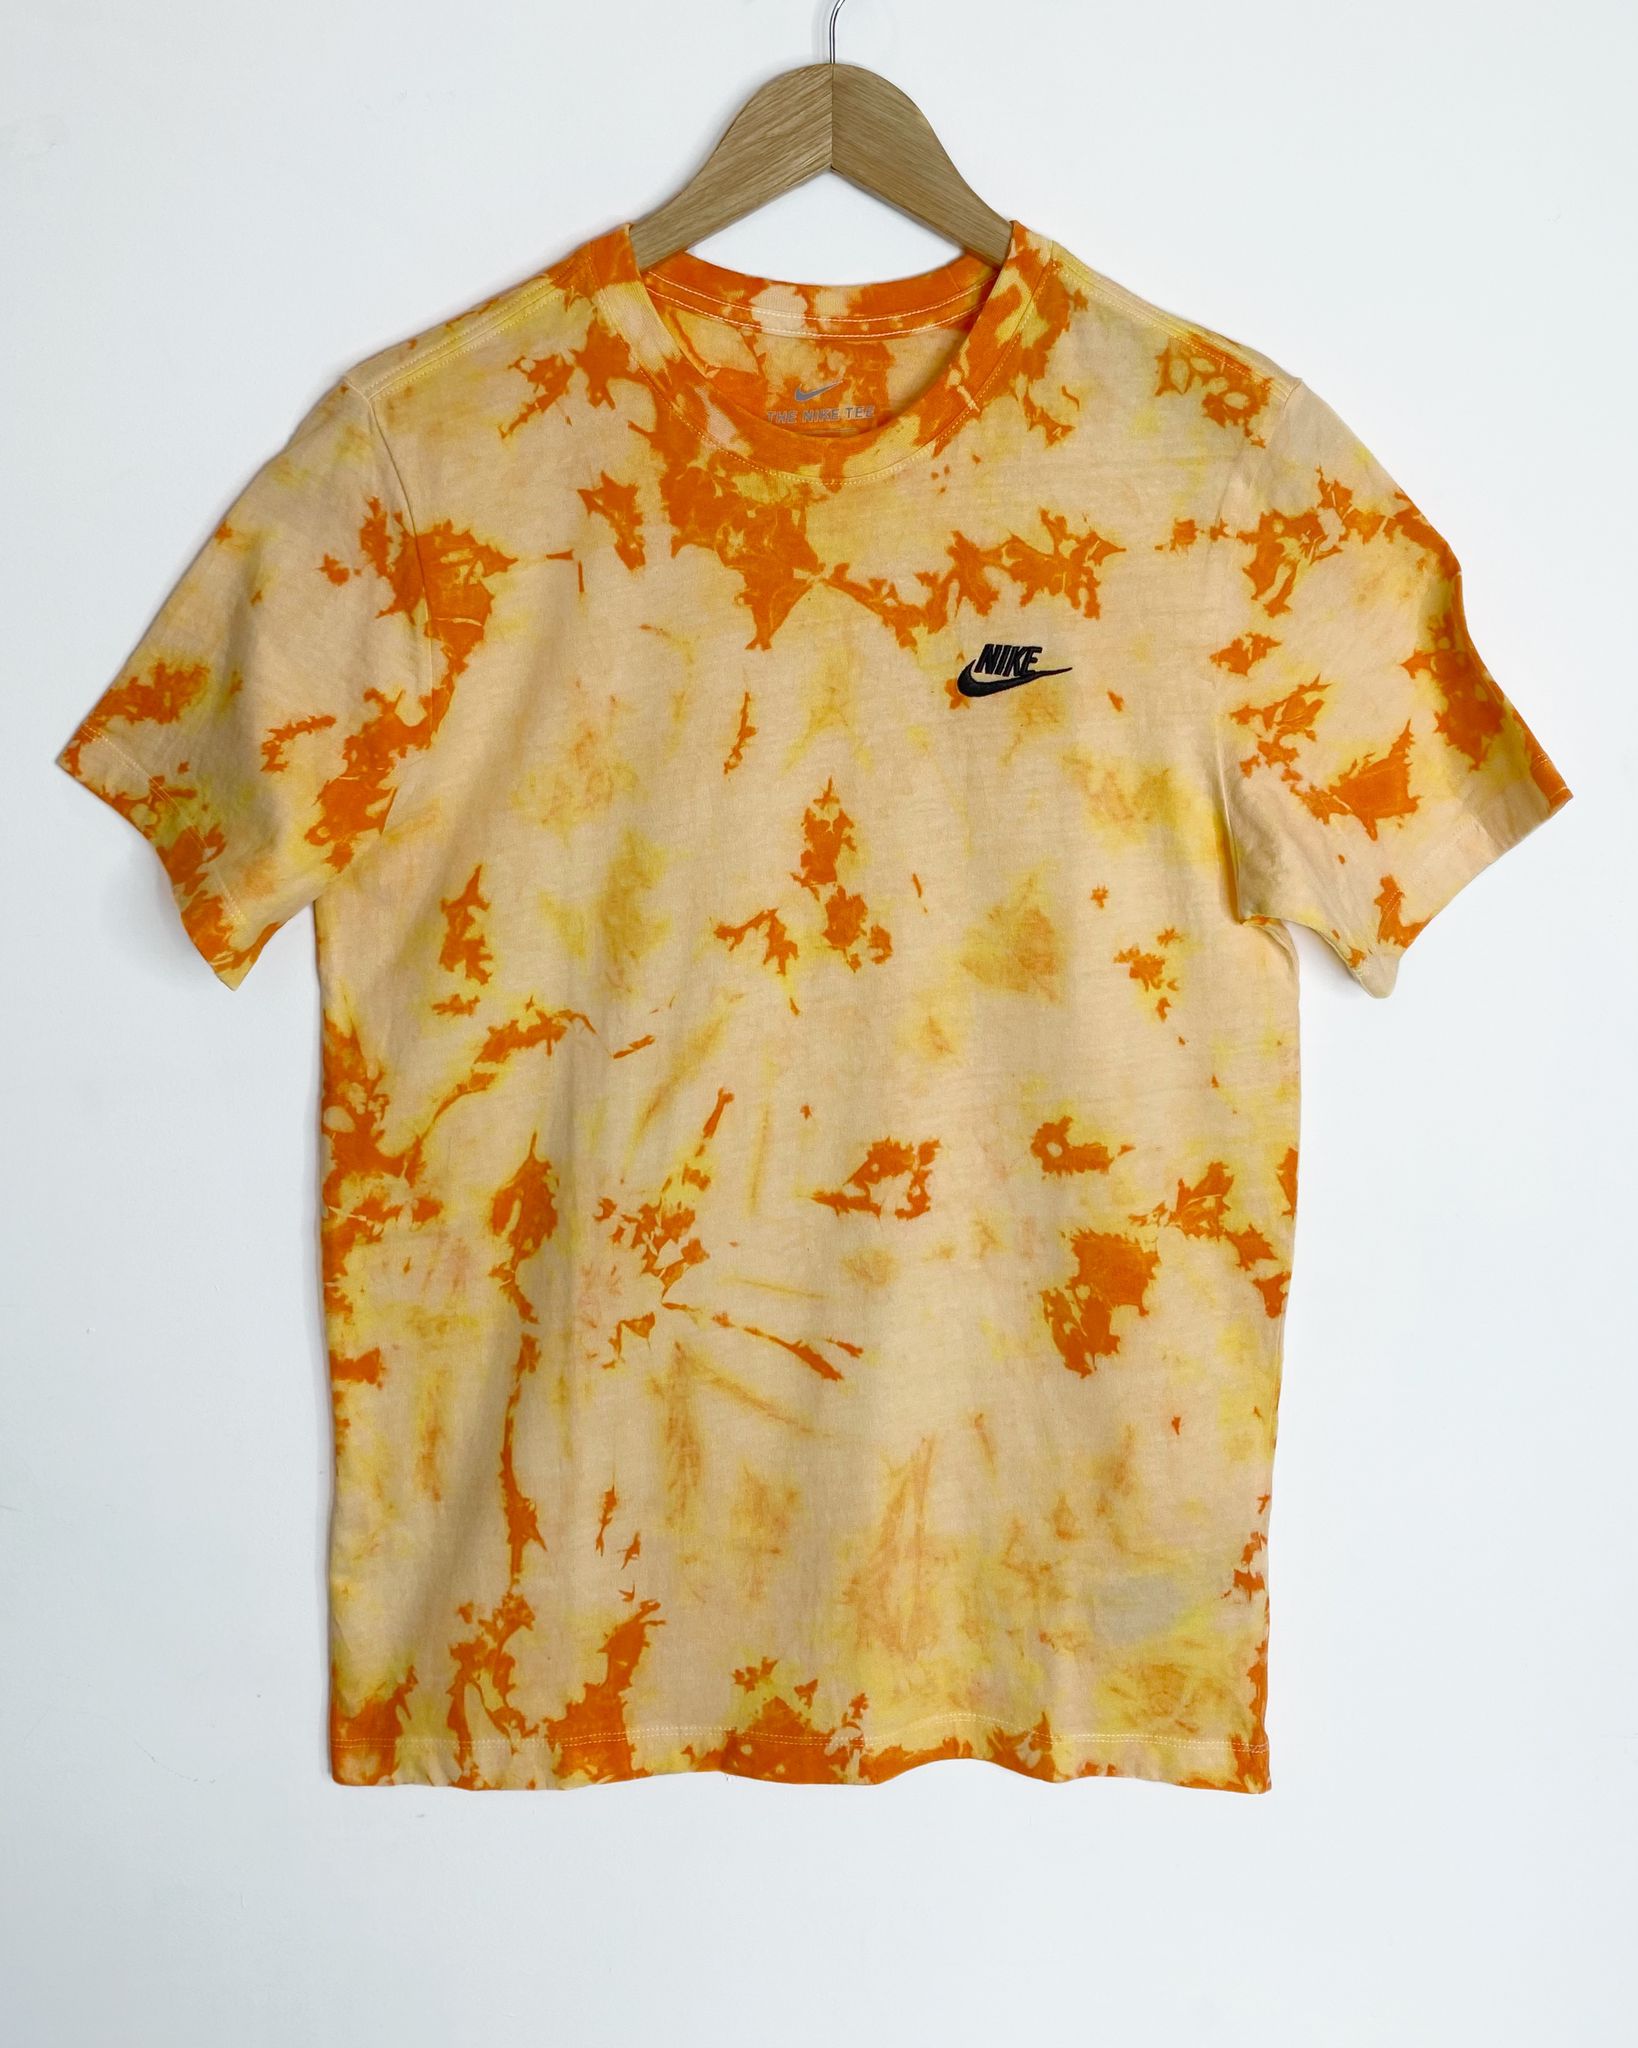 Unique hand-dyed Fanta mix colors tie dye on a classic Nike t-shirt.